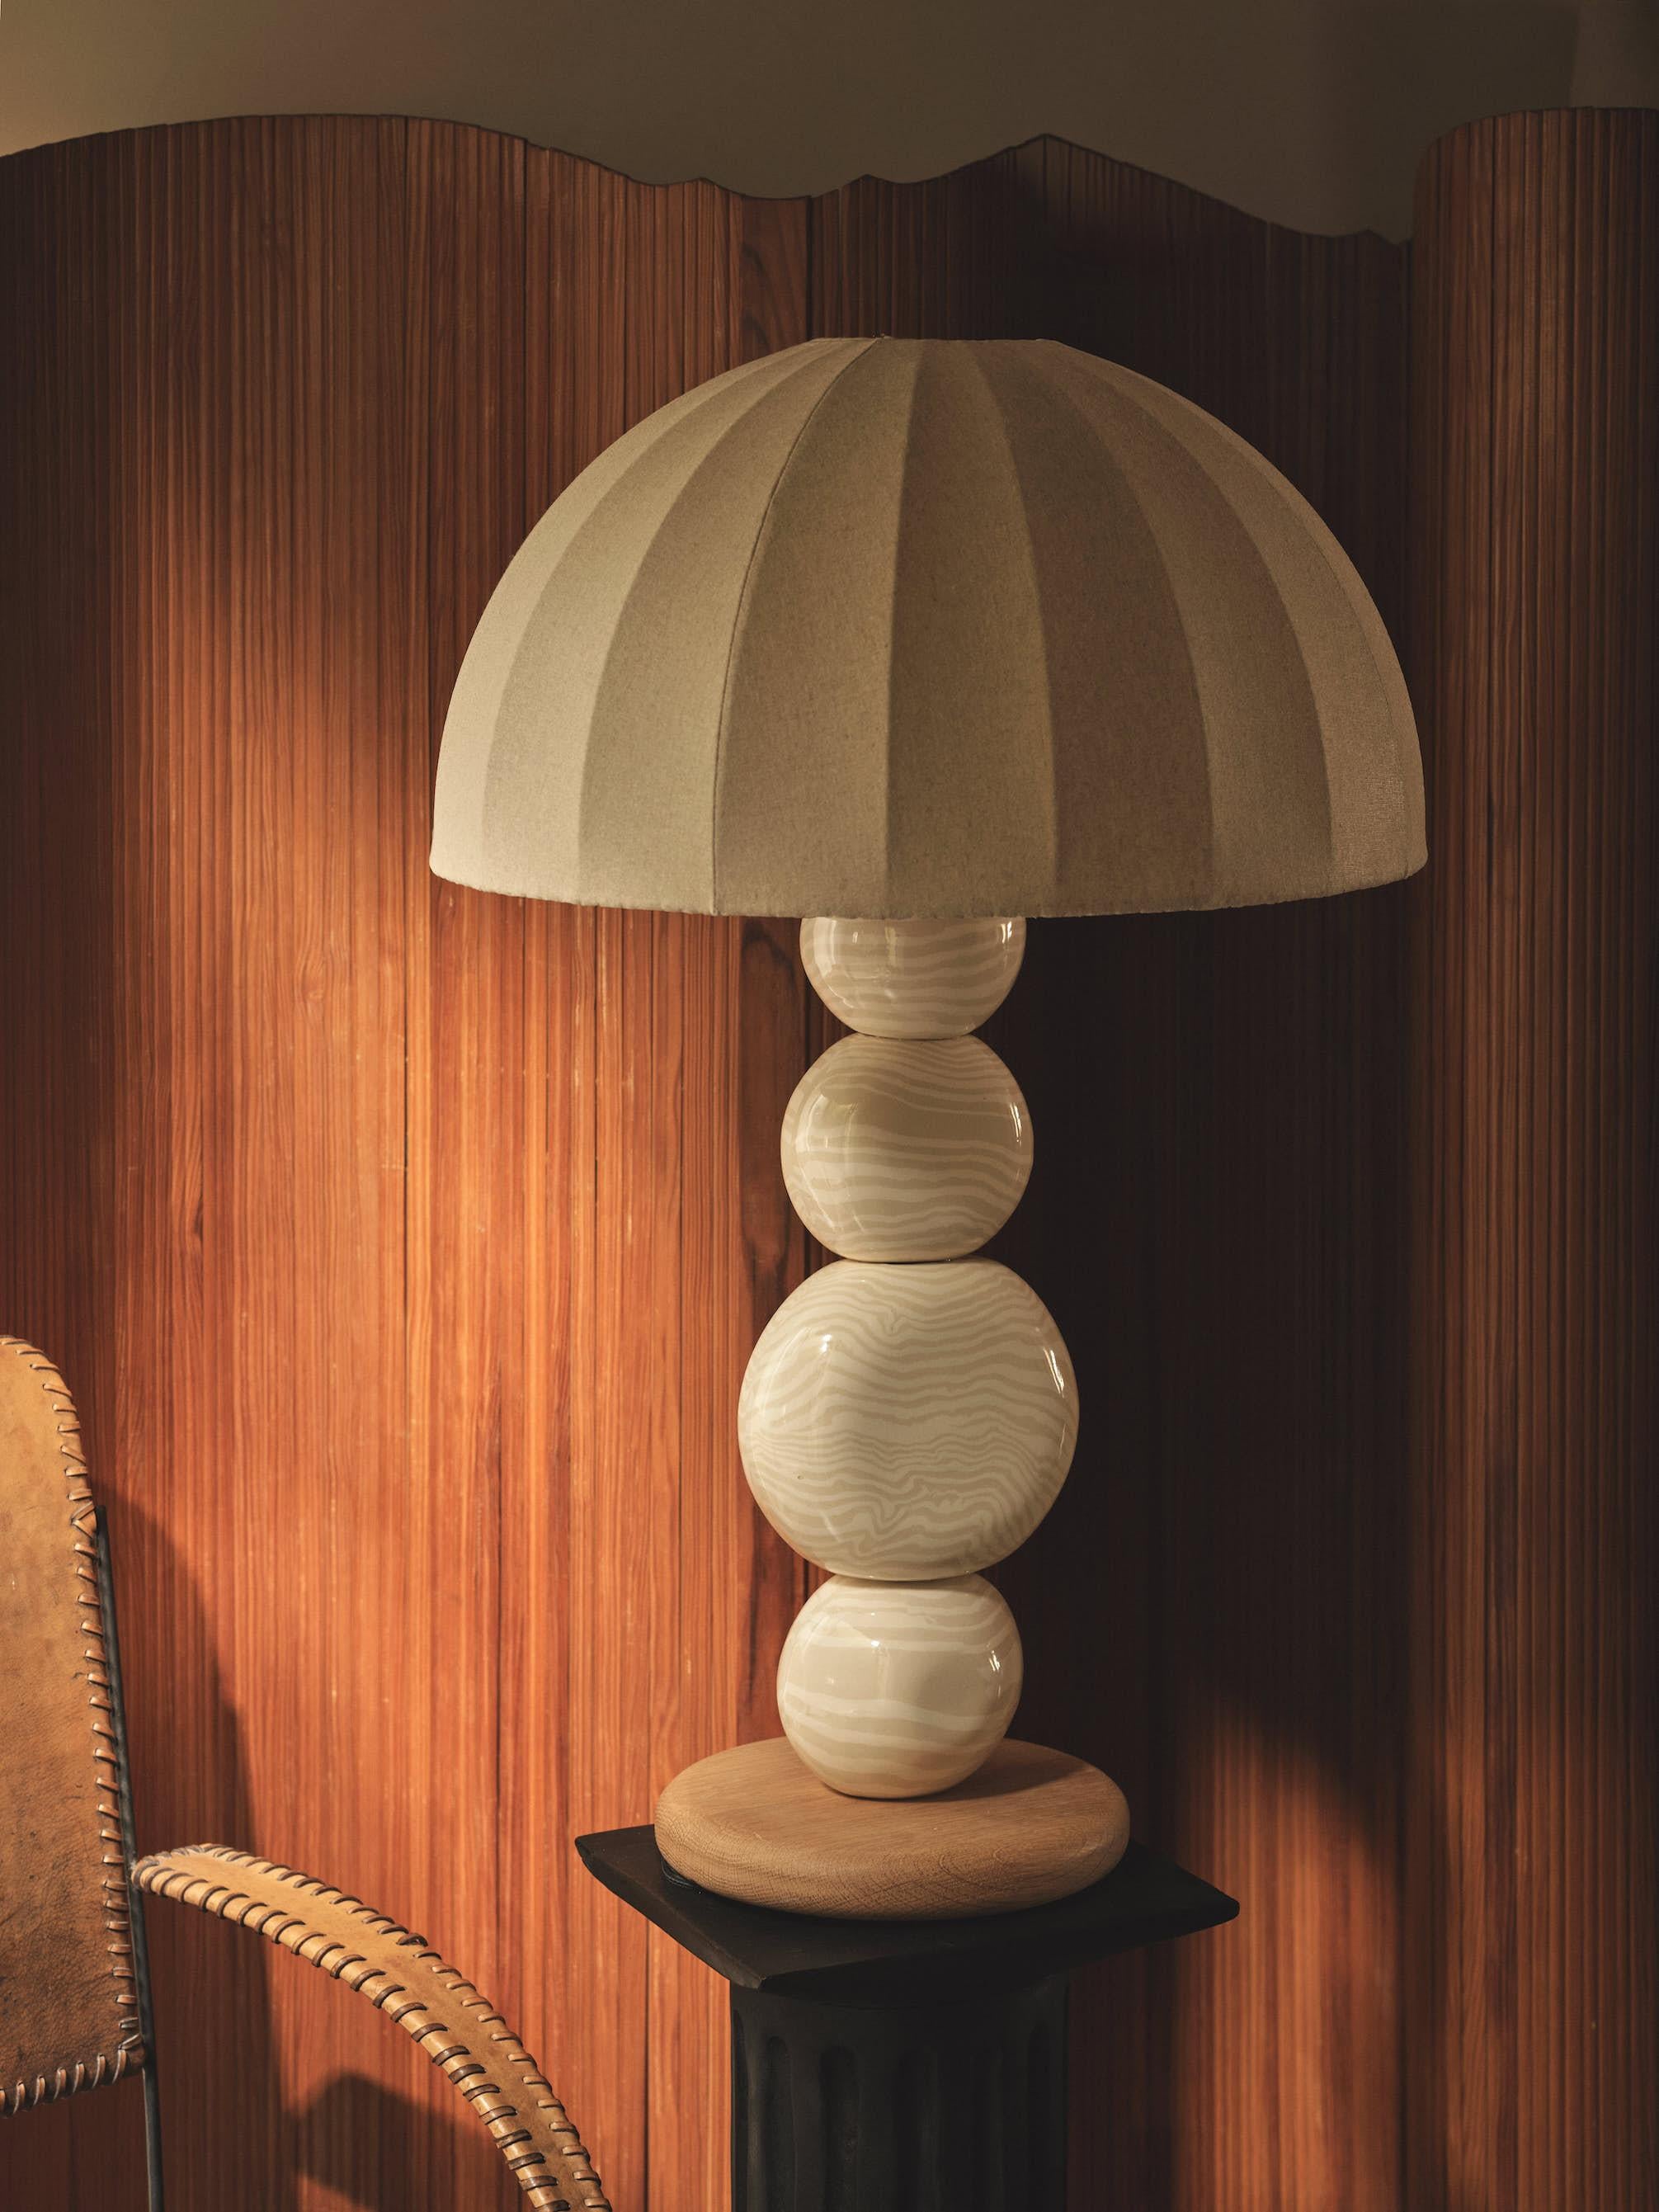 Fired Henry Holland Studio Handmade Oatmeal and White Ceramic Sphere Table Lamp For Sale